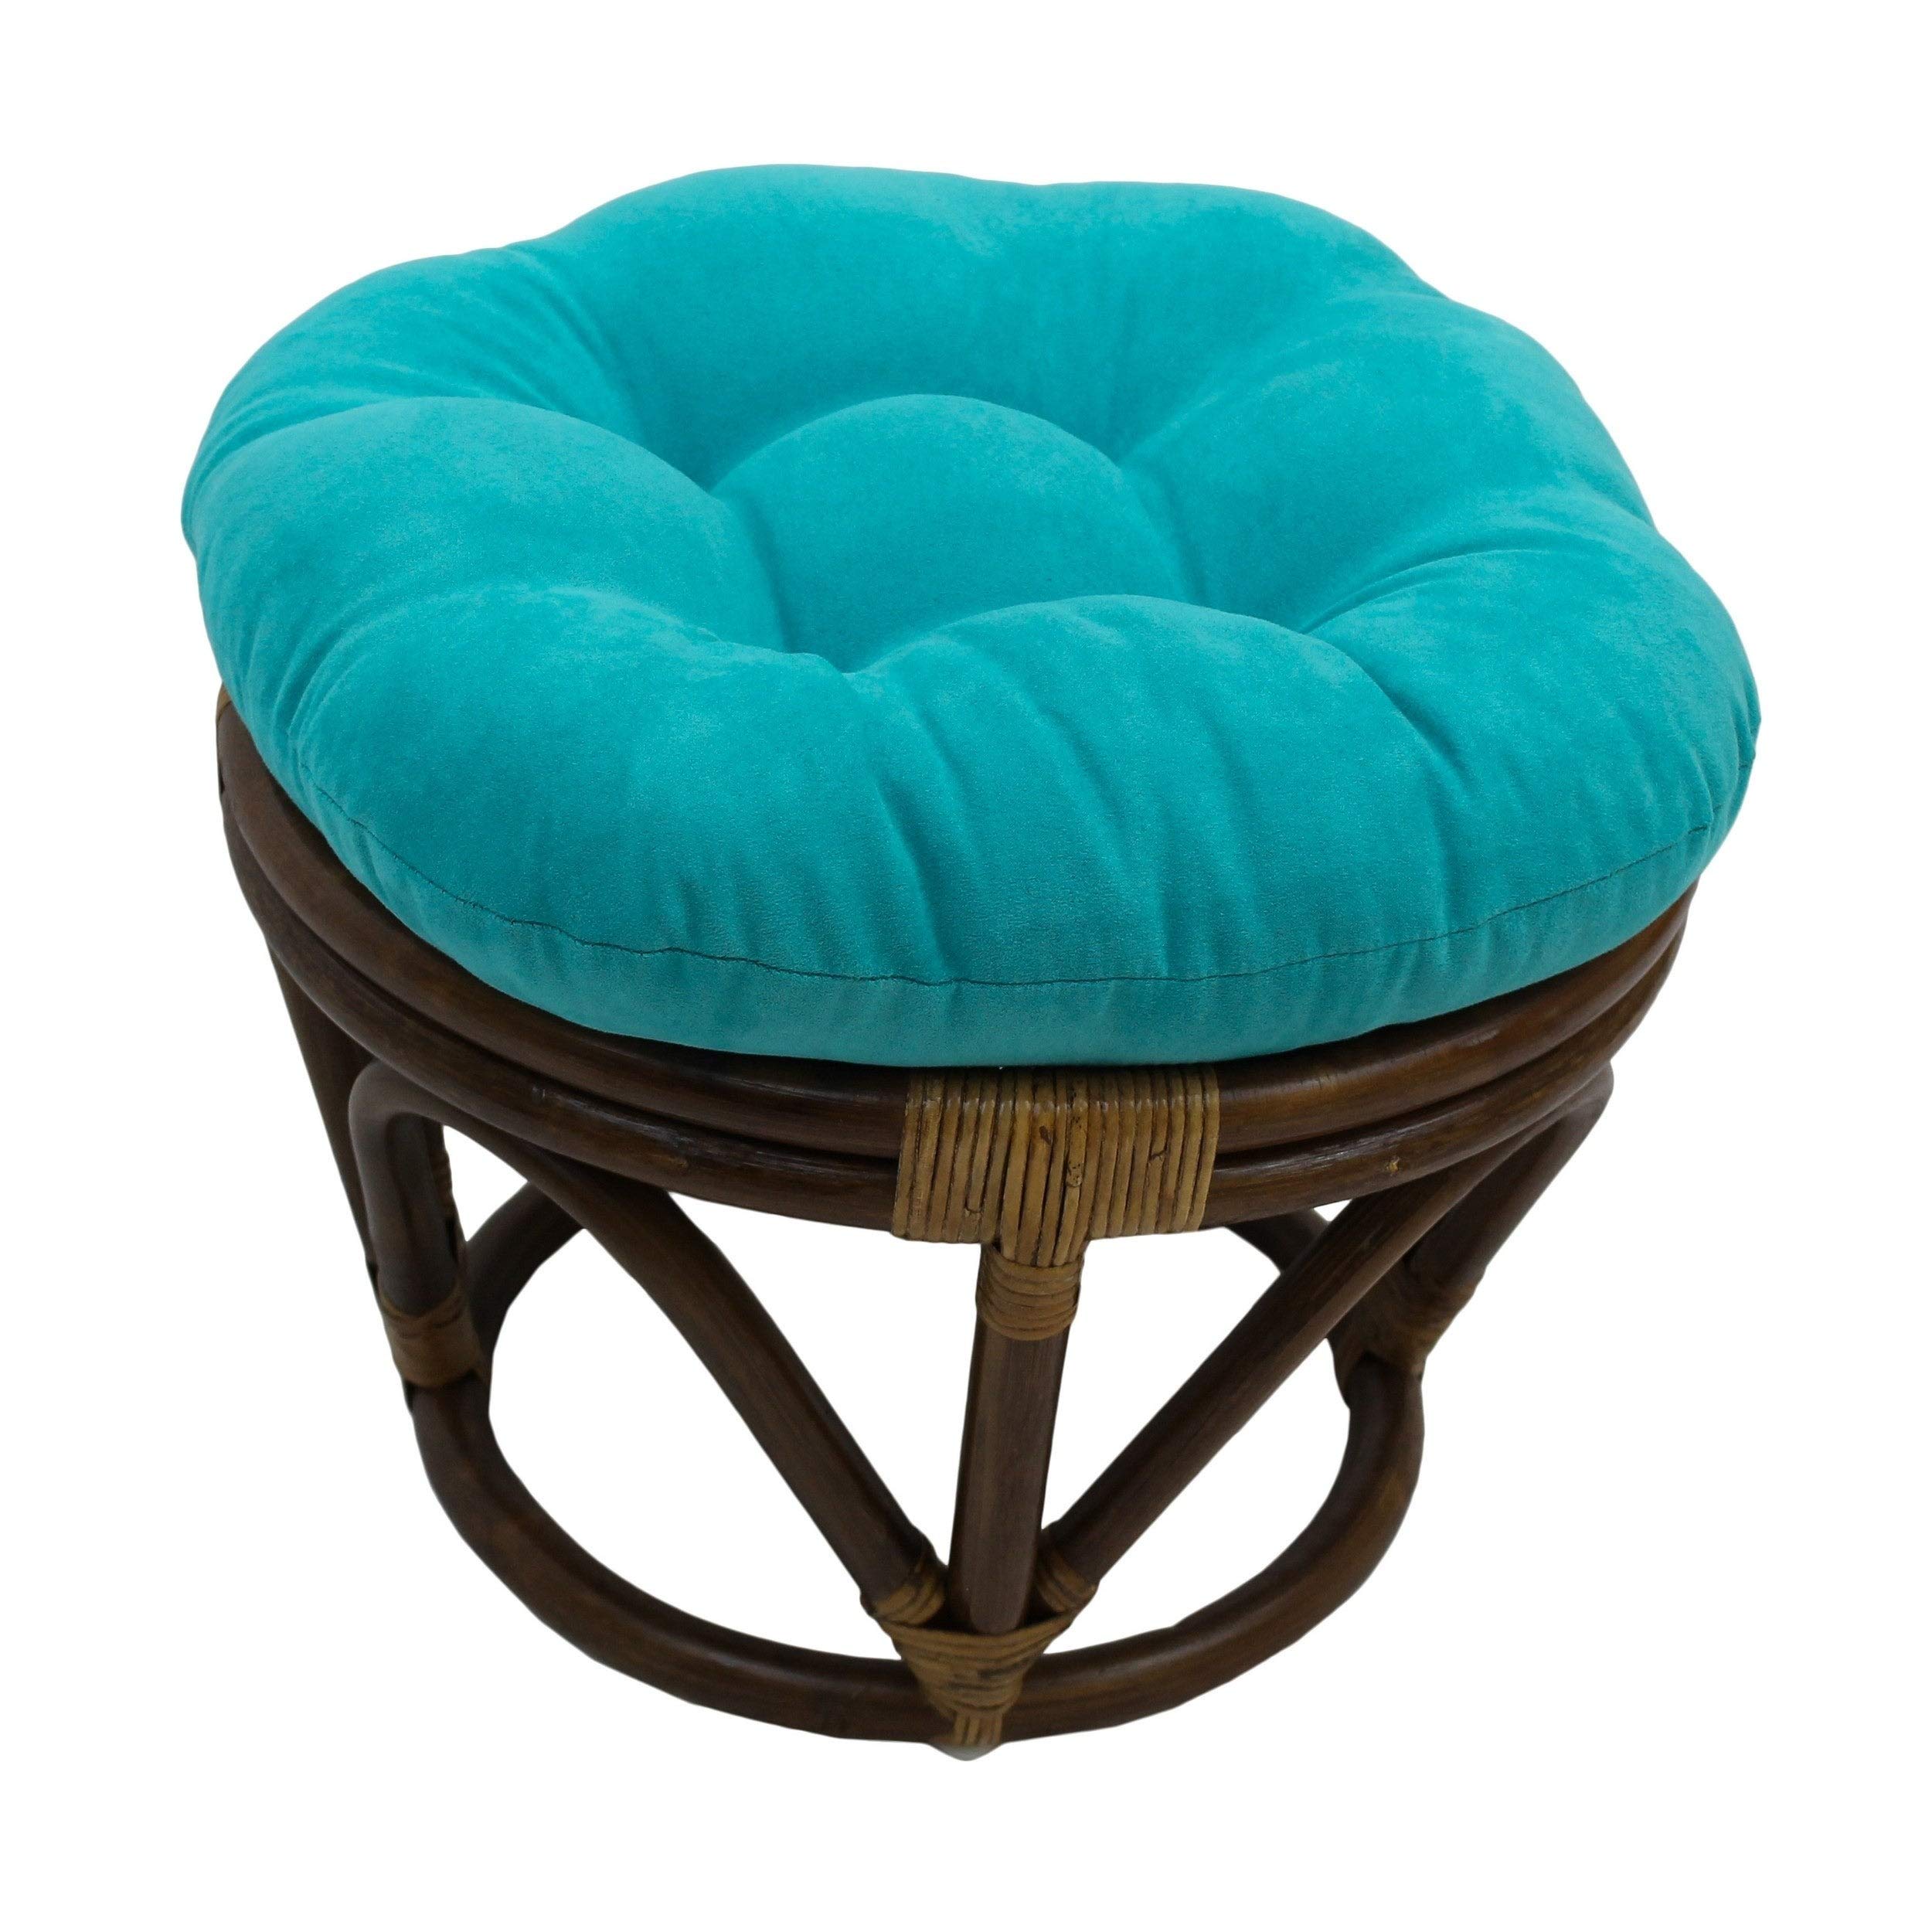 Blazing Needles 18-inch Round Tufted Microsuede Footstool Cushion, 18 x 18, Teal